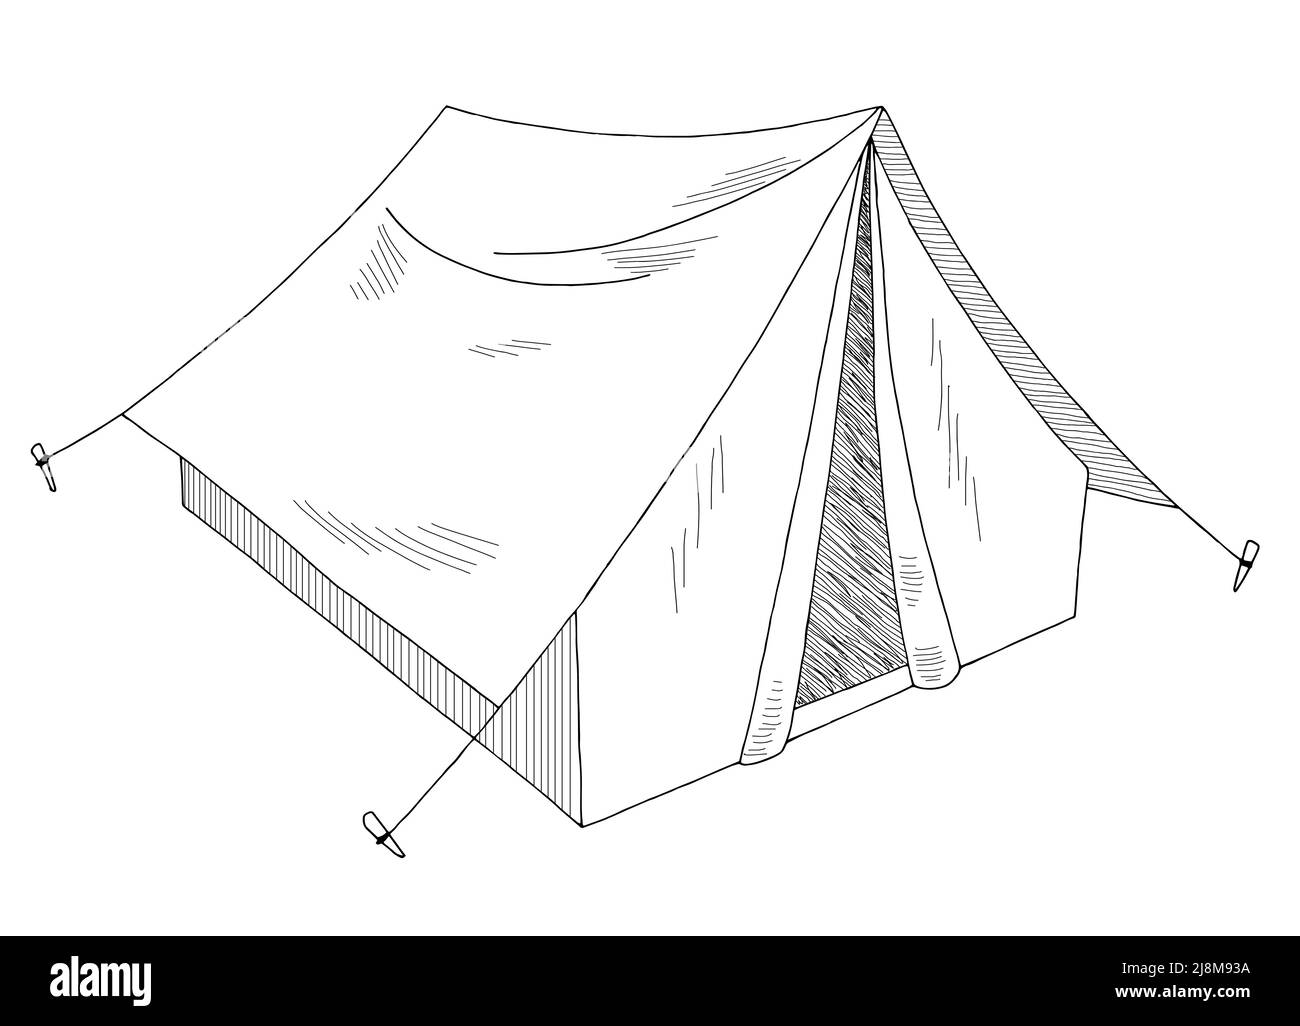 Hand-drawn Tourist Tent Sketch Tents Pencil Stock Vector (Royalty Free)  1787852567 | Shutterstock